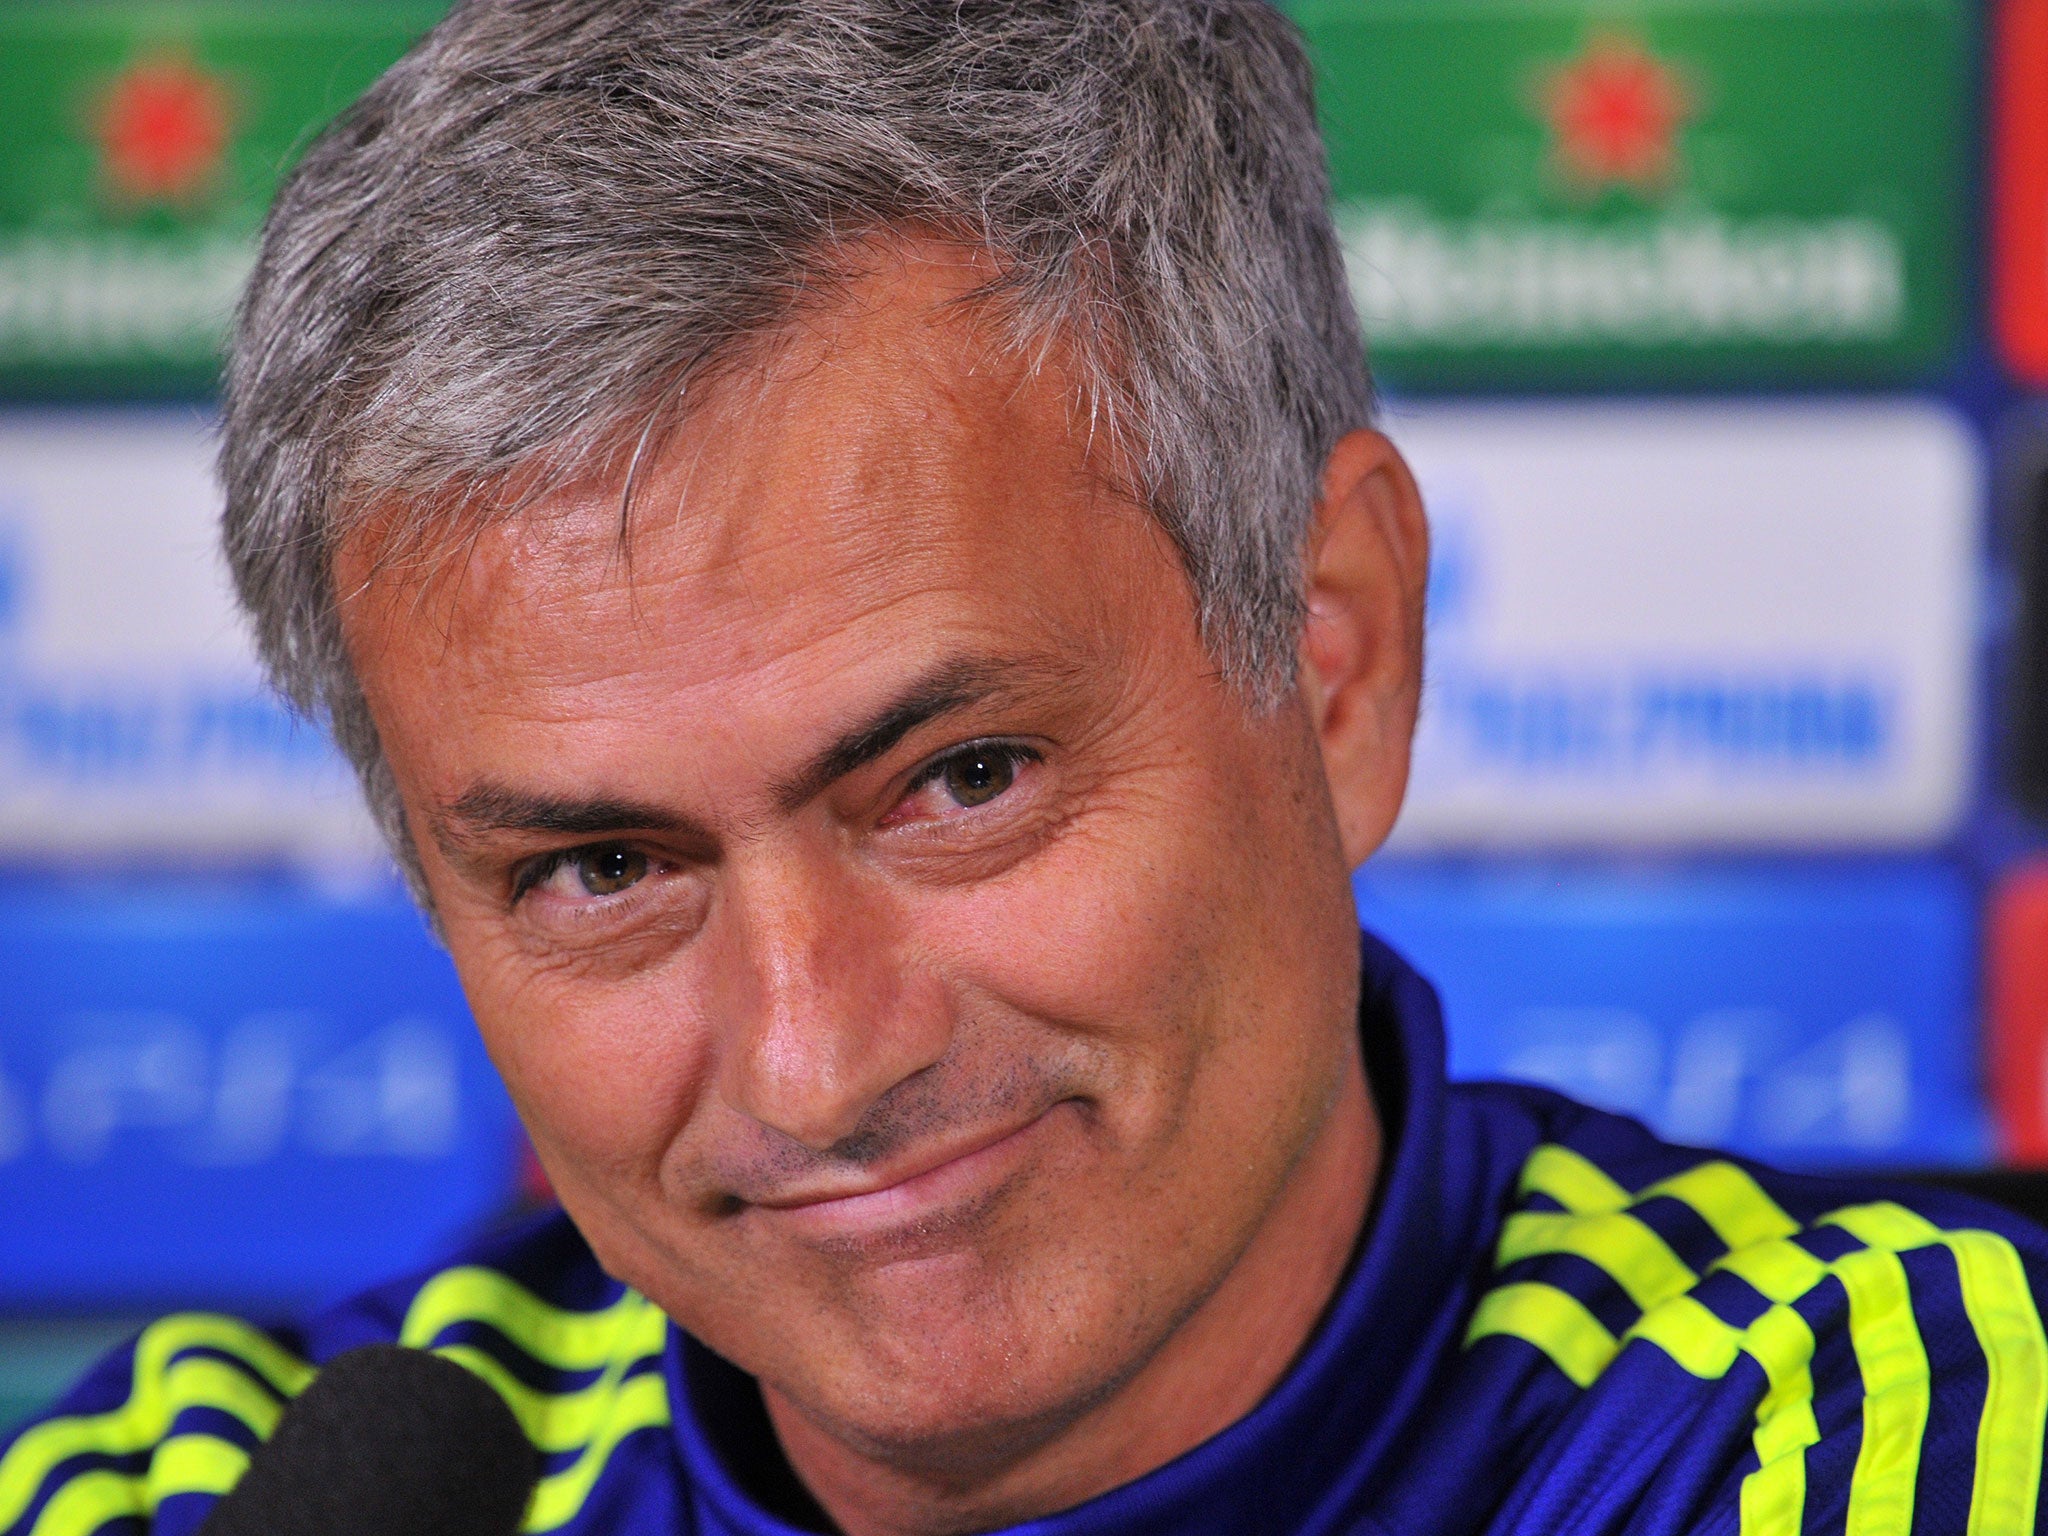 Chelsea's Jose Mourinho smiles during a press conference on October 20, 2014 ahead of the UEFA Champions League group match against Maribor.